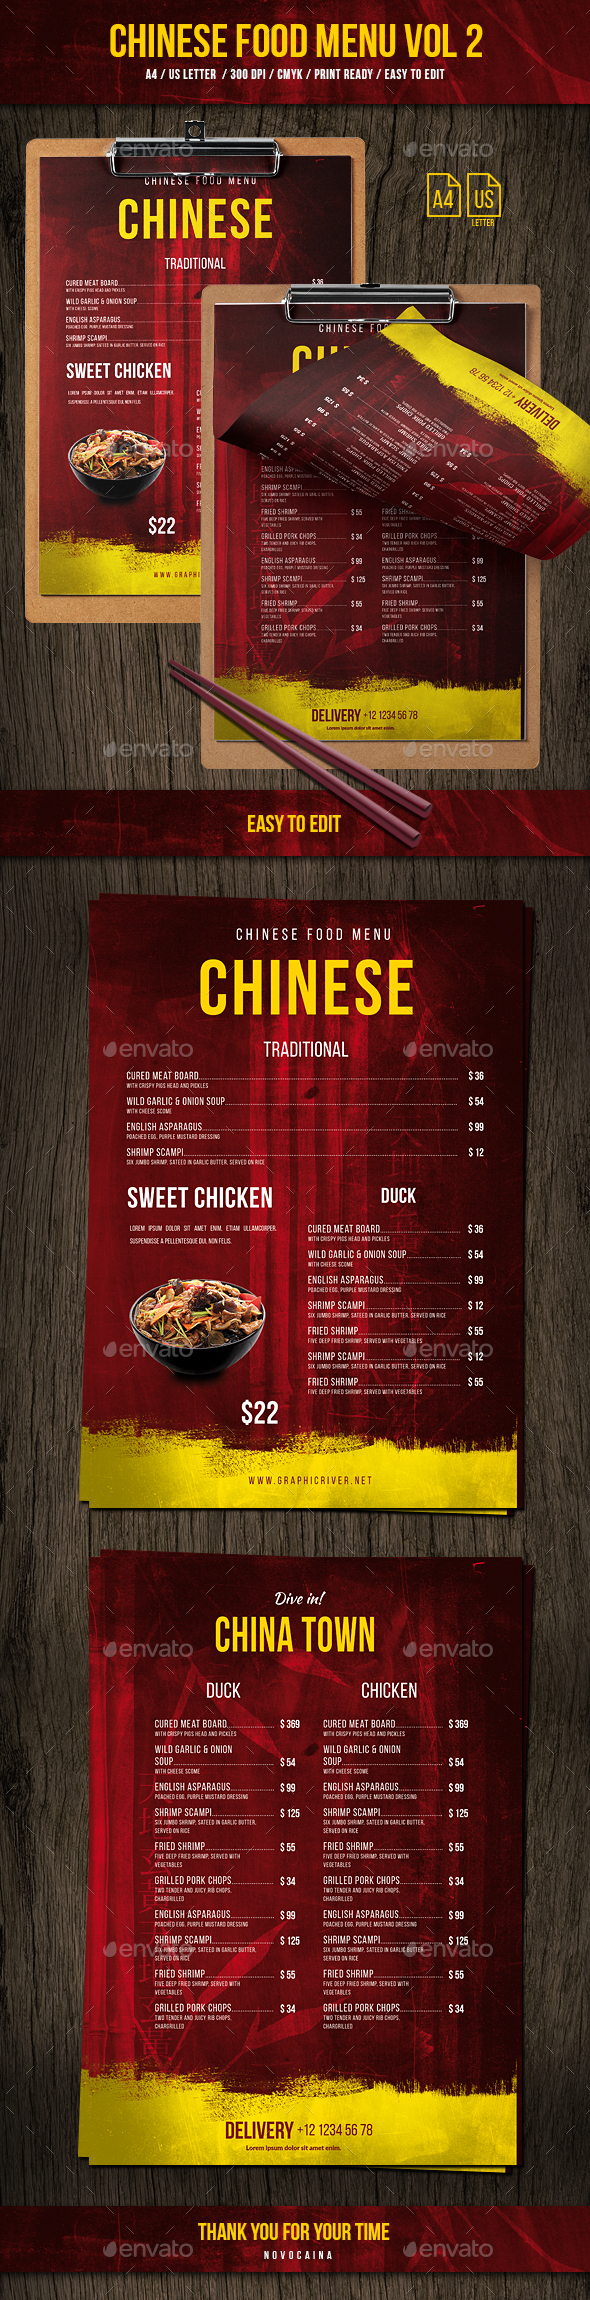  Chinese A4 & US Letter Single Page Food Menu Vol 2 